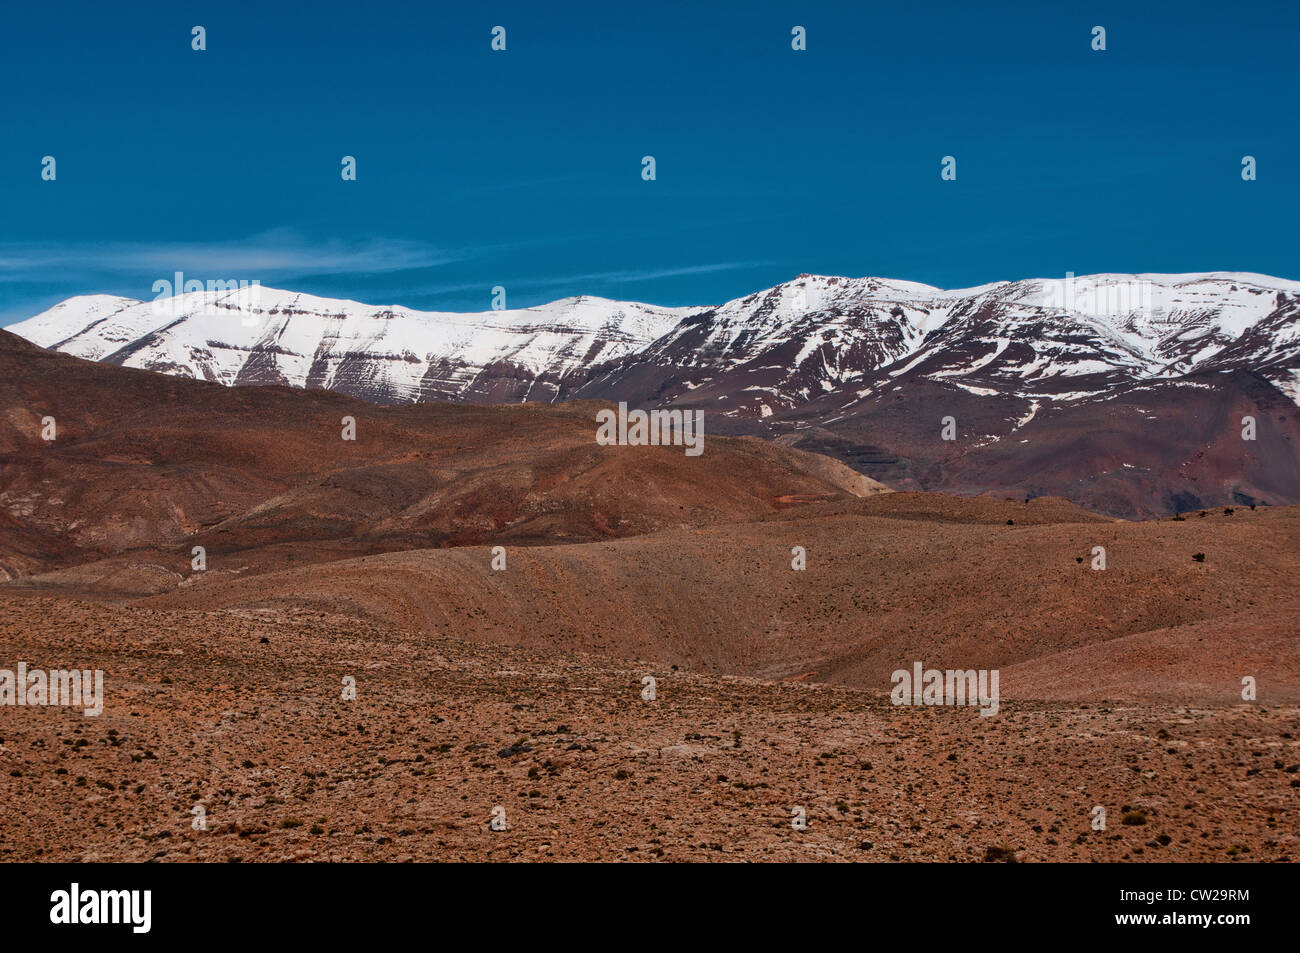 dramatic scenery in the Southern Atlas Mountains, Morocco Stock Photo